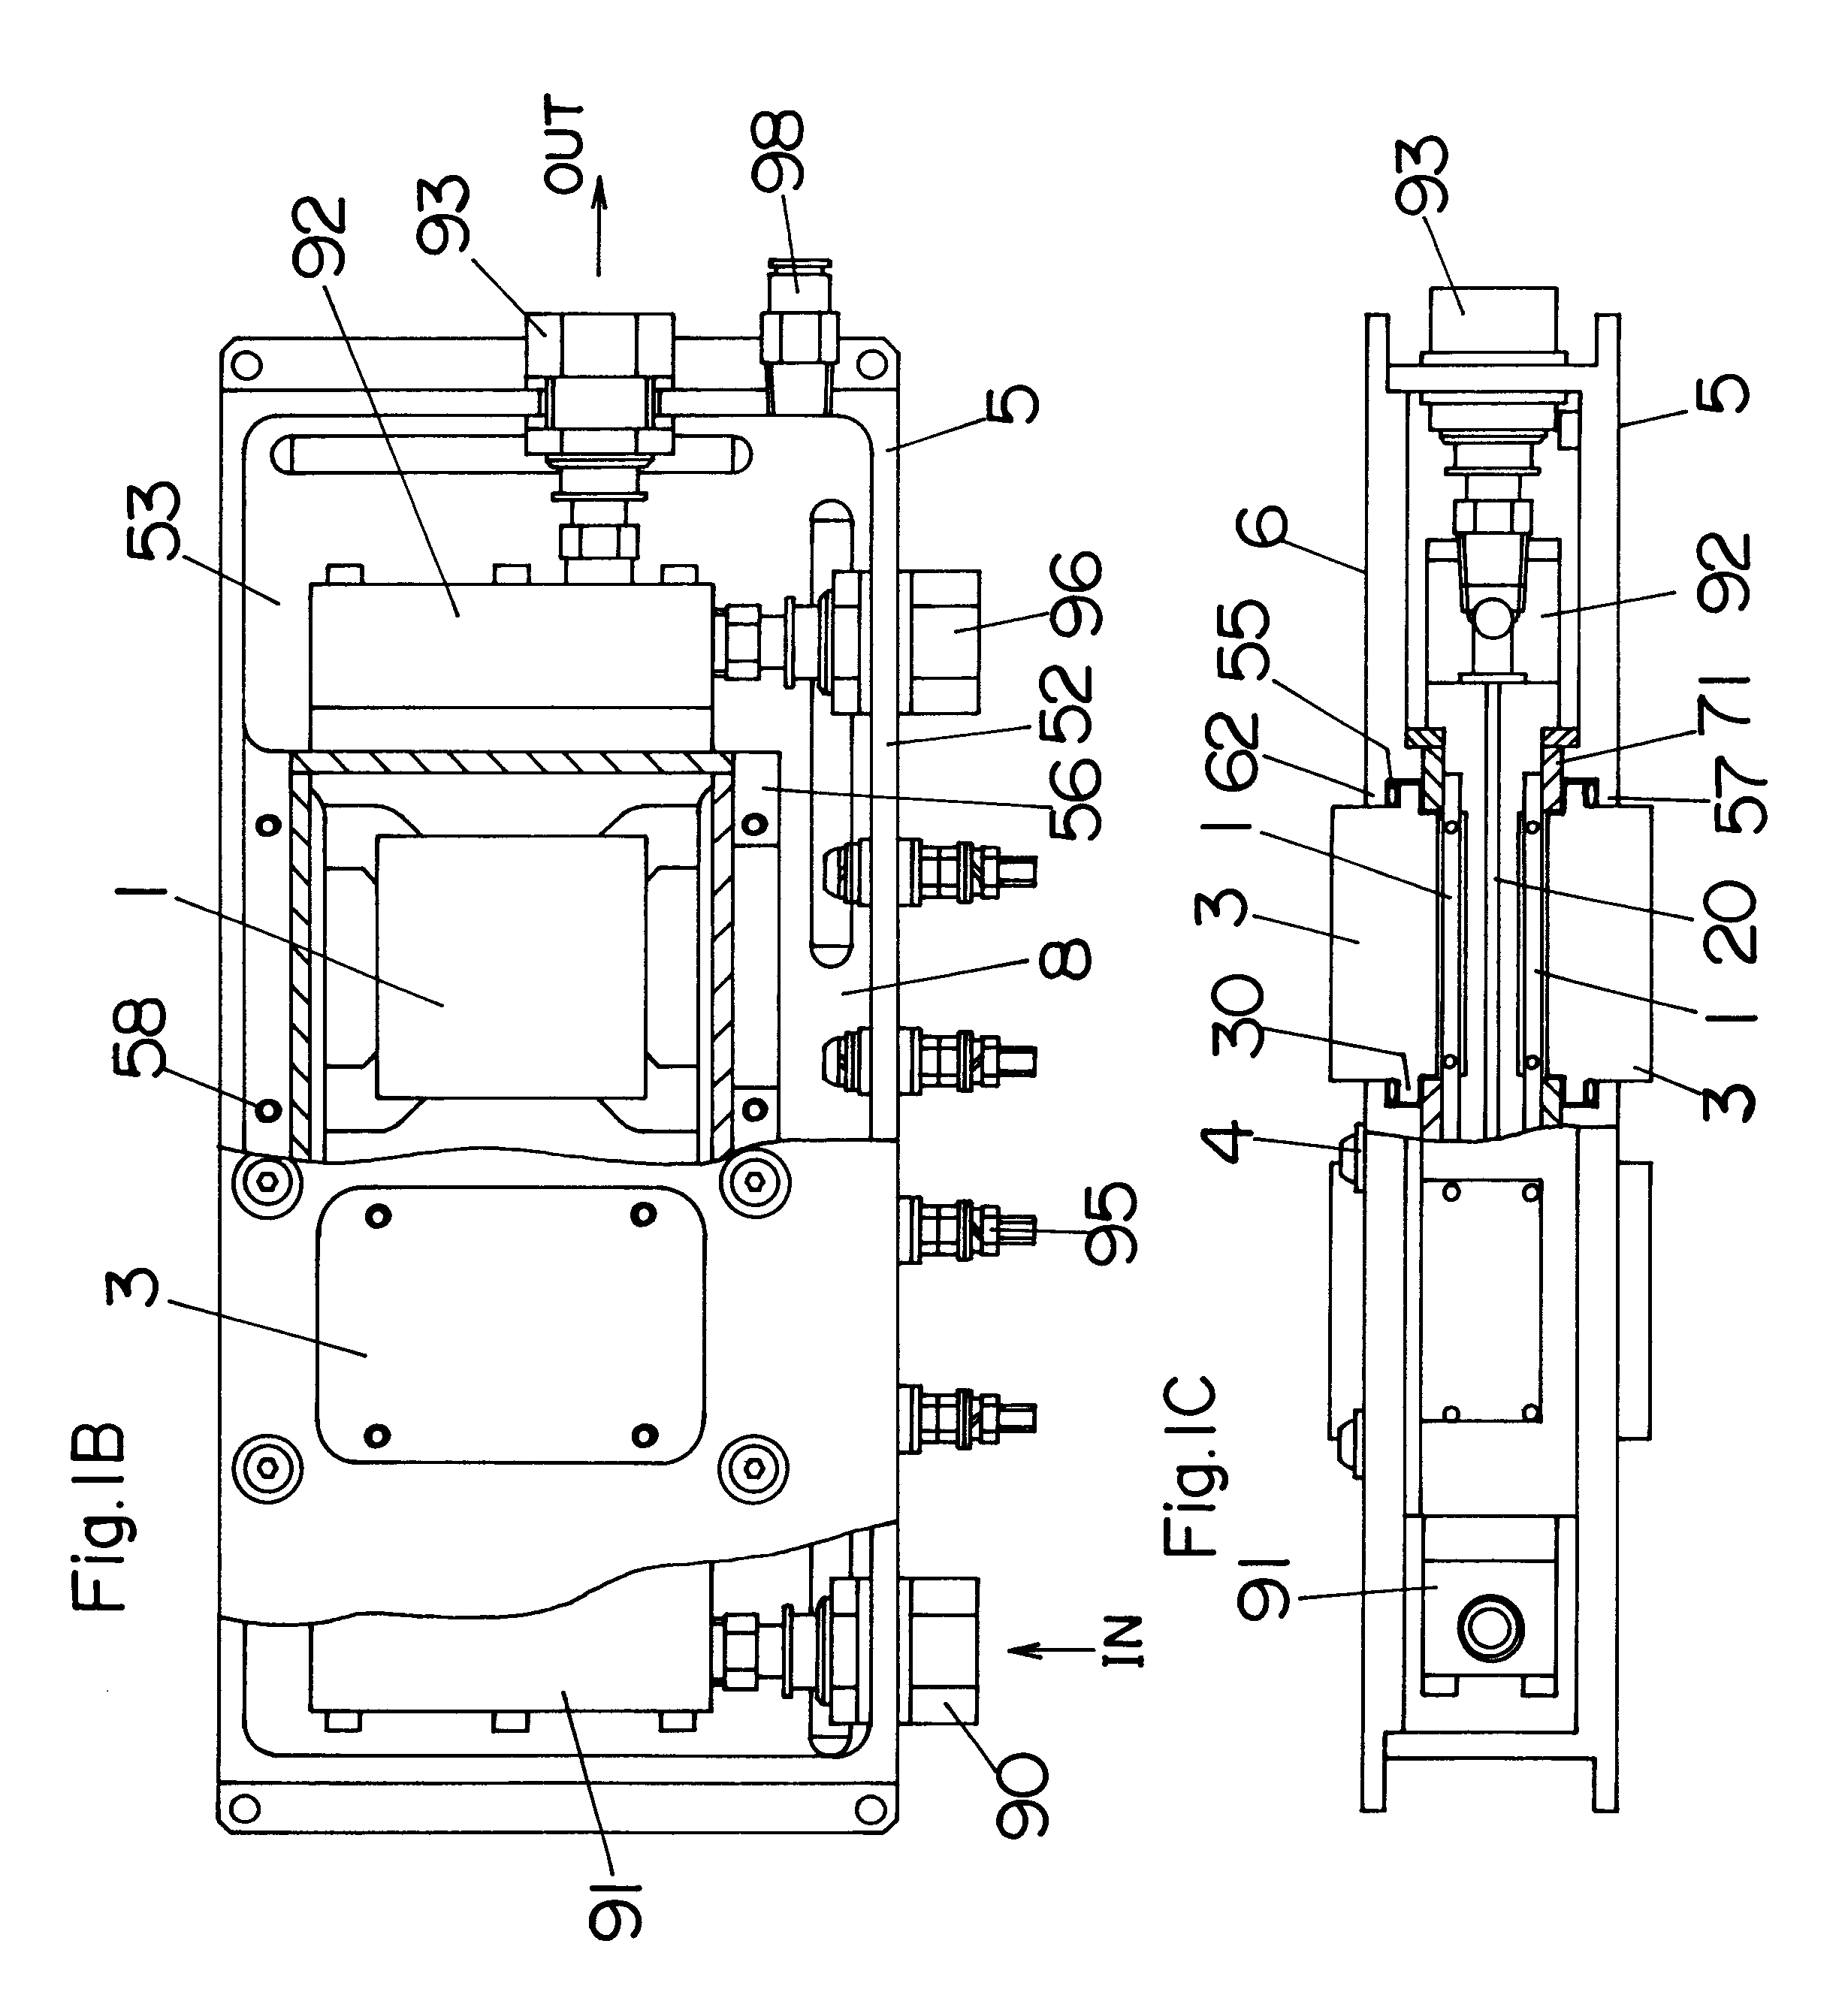 Apparatus for controlling temperature of fluid by use of thermoelectric device